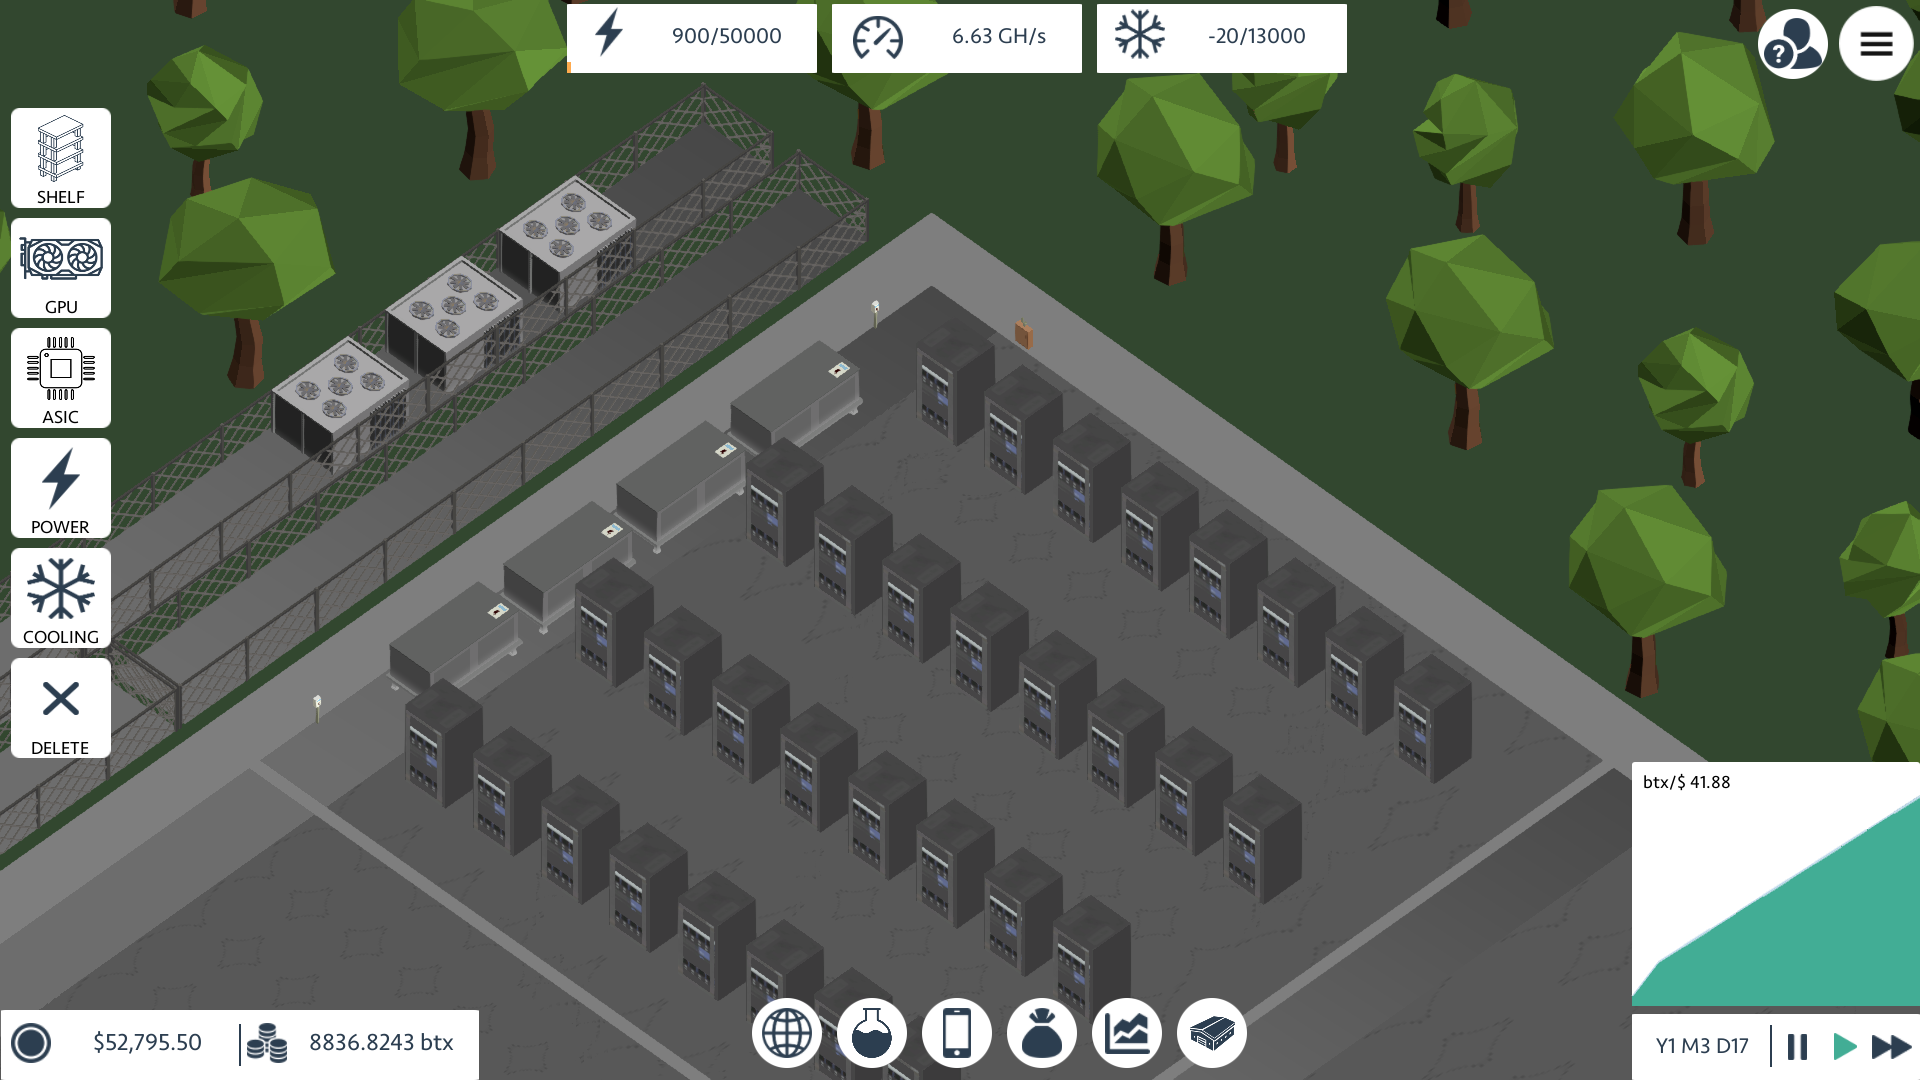 Blockchain Tycoon Early Access launch on August 9